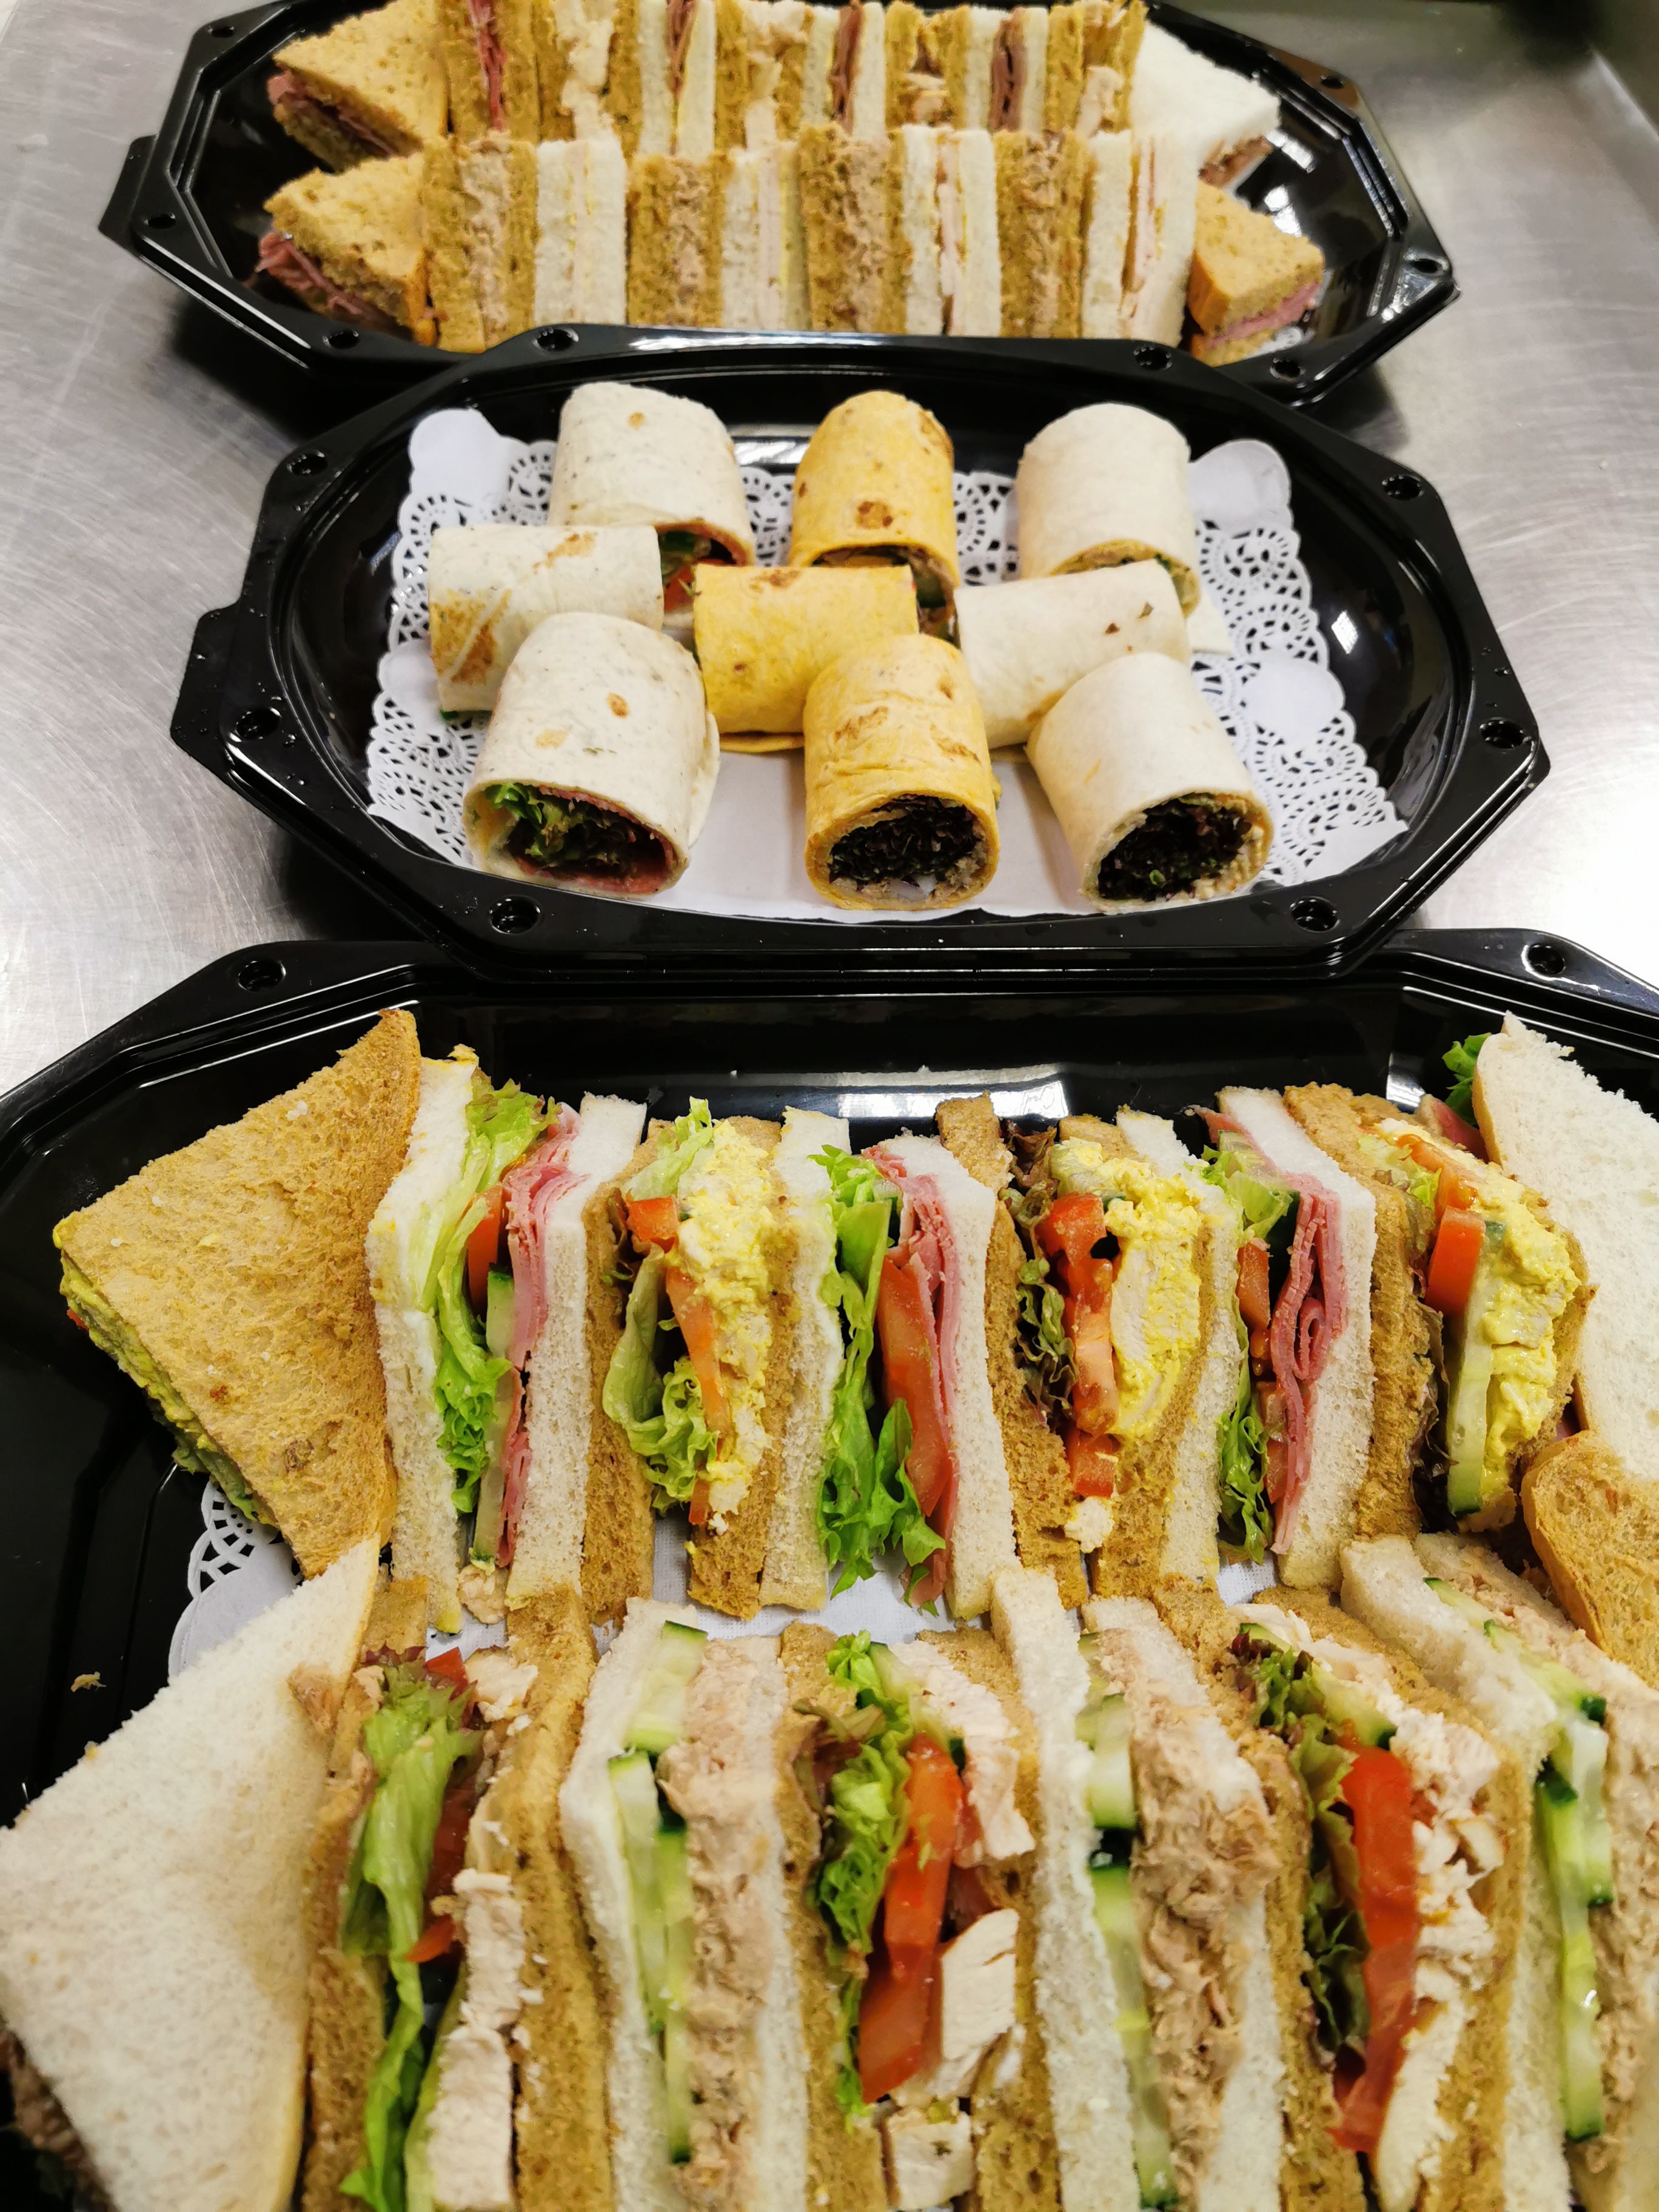 7 - Regular, classic sandwiches, wraps, savouries and fruit platter